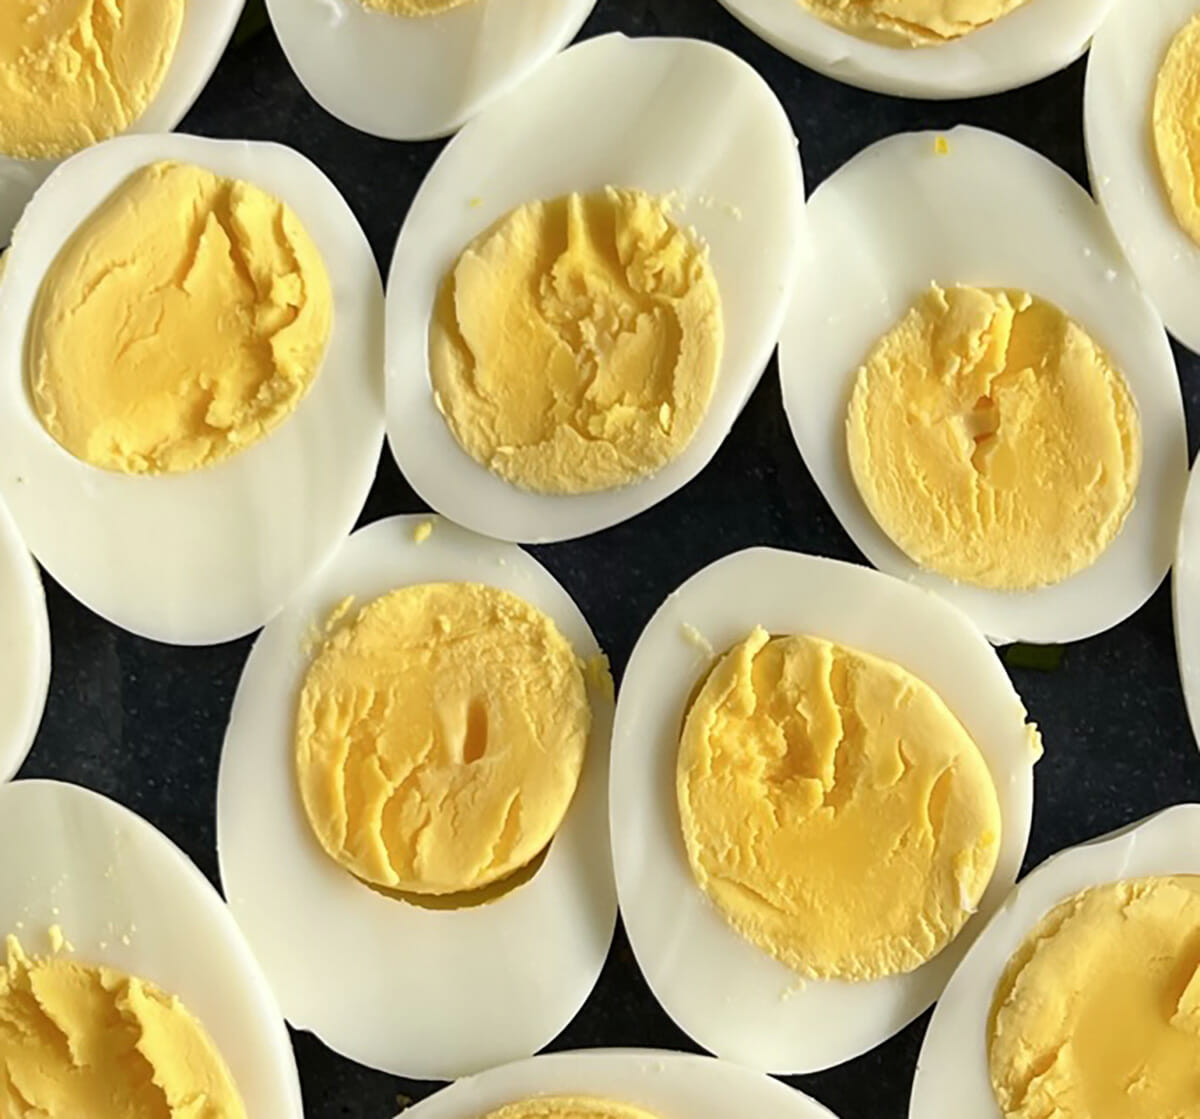 Hard boiled eggs made in an Instant Pot.